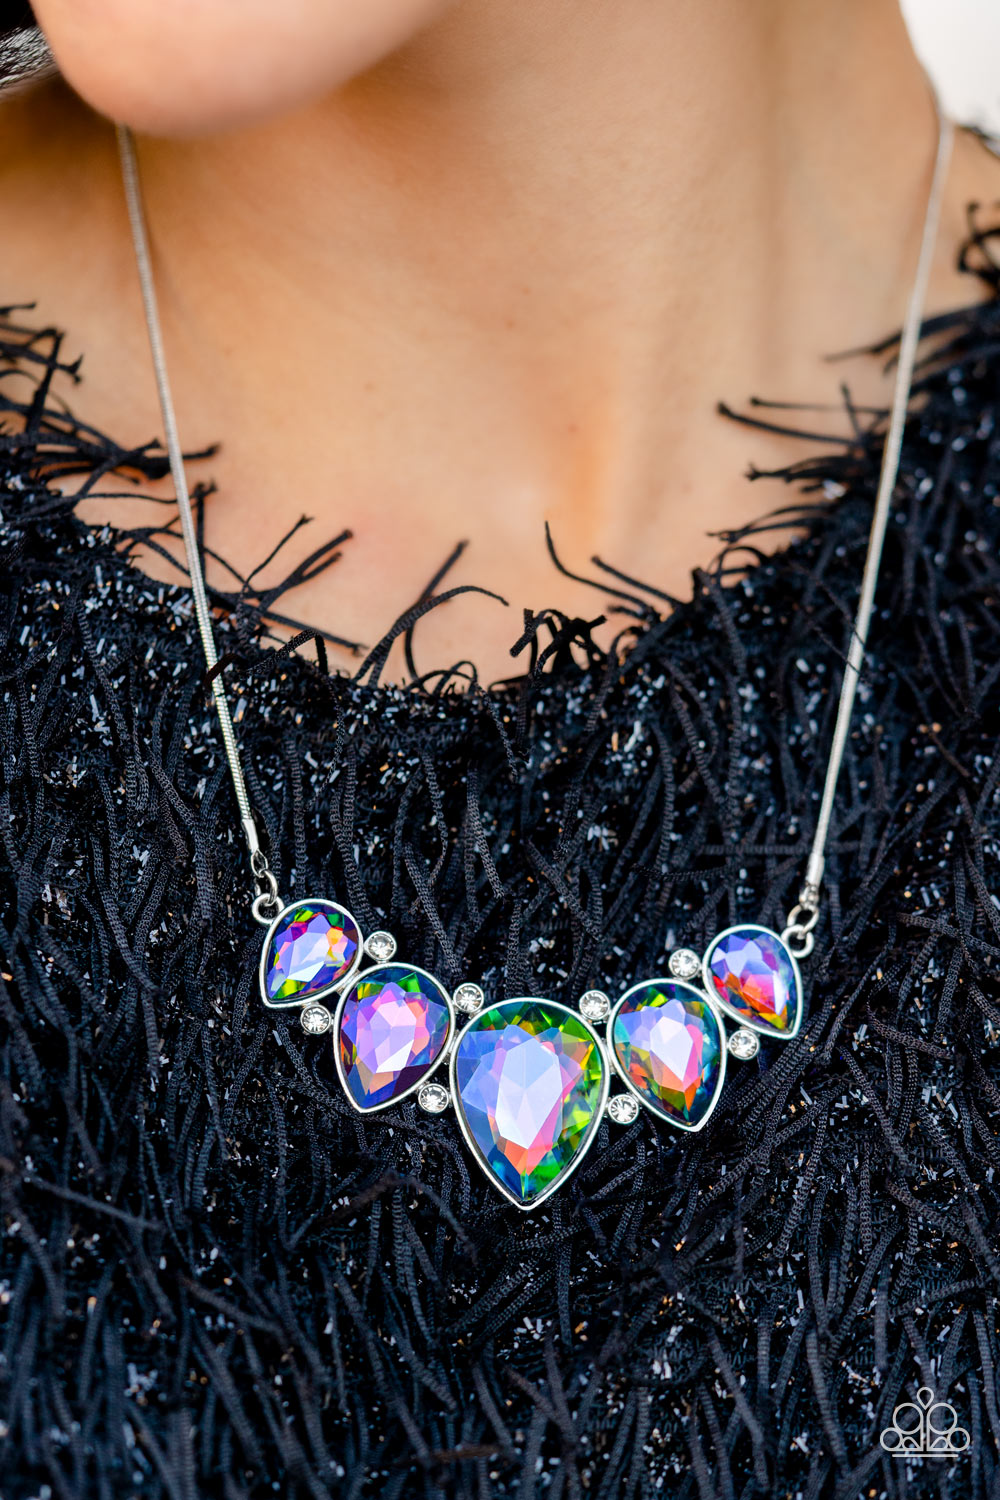 Paparazzi Regally Refined Multi Short Necklace - Life Of The Party Exclusive November 2022 - P2RE-MTXX-169XX